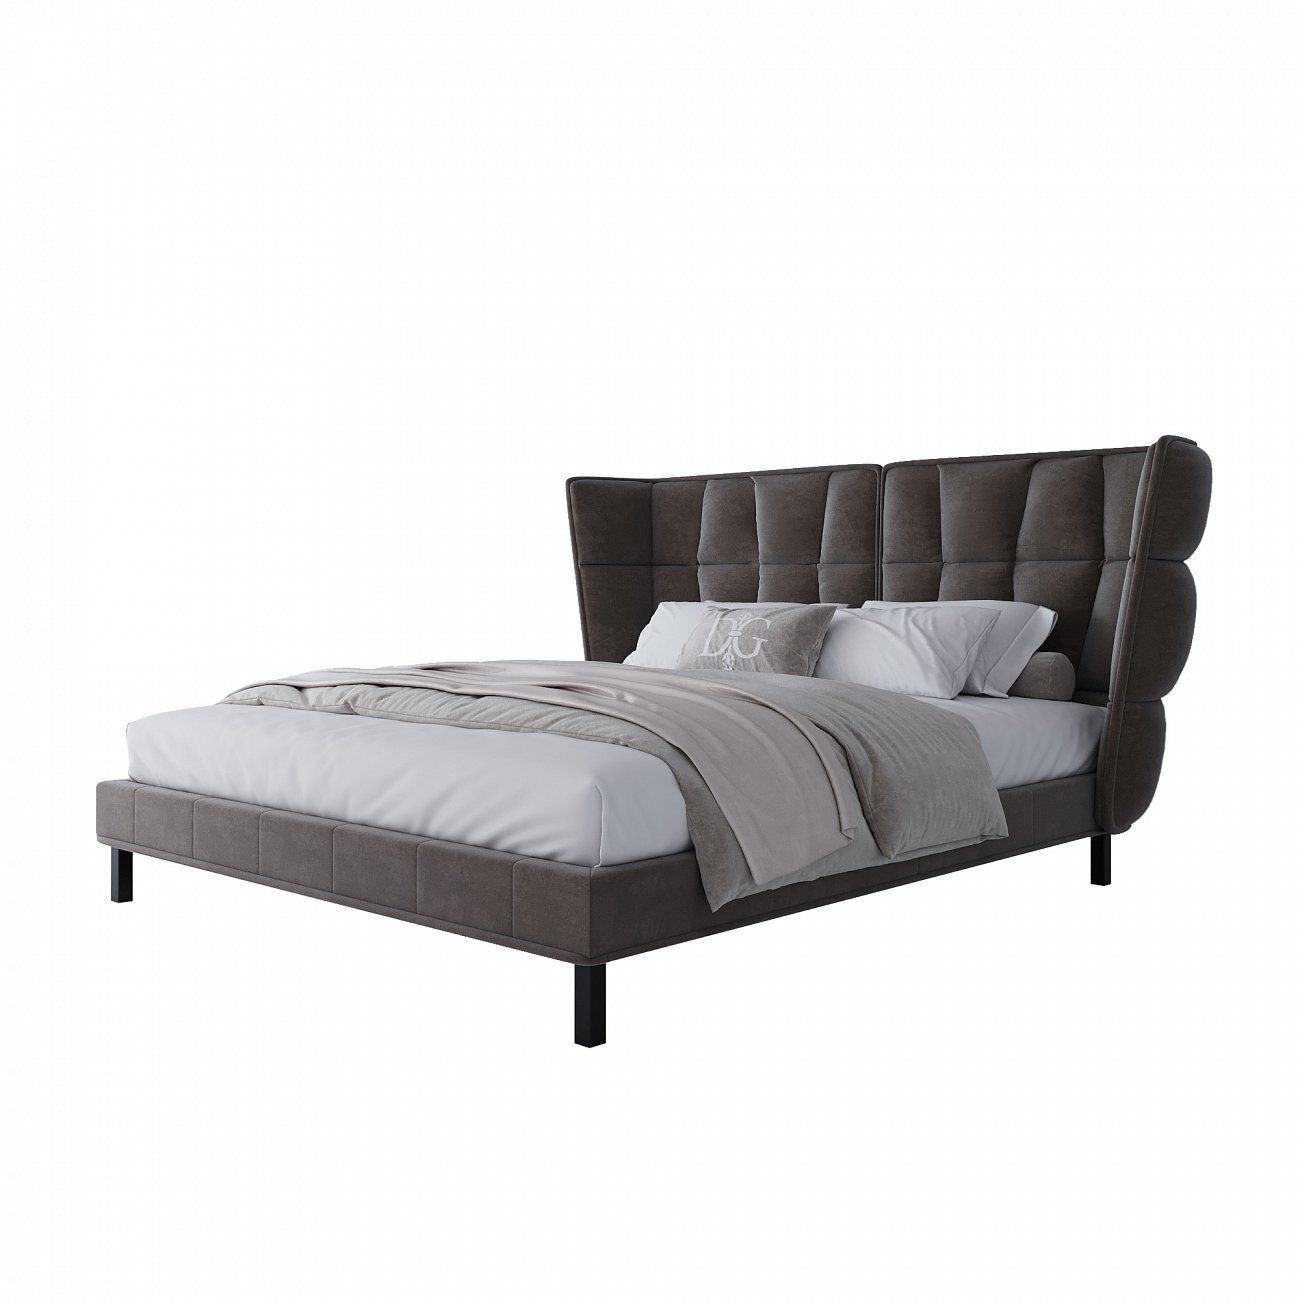 Husk double bed 180x200 grey (box spring)